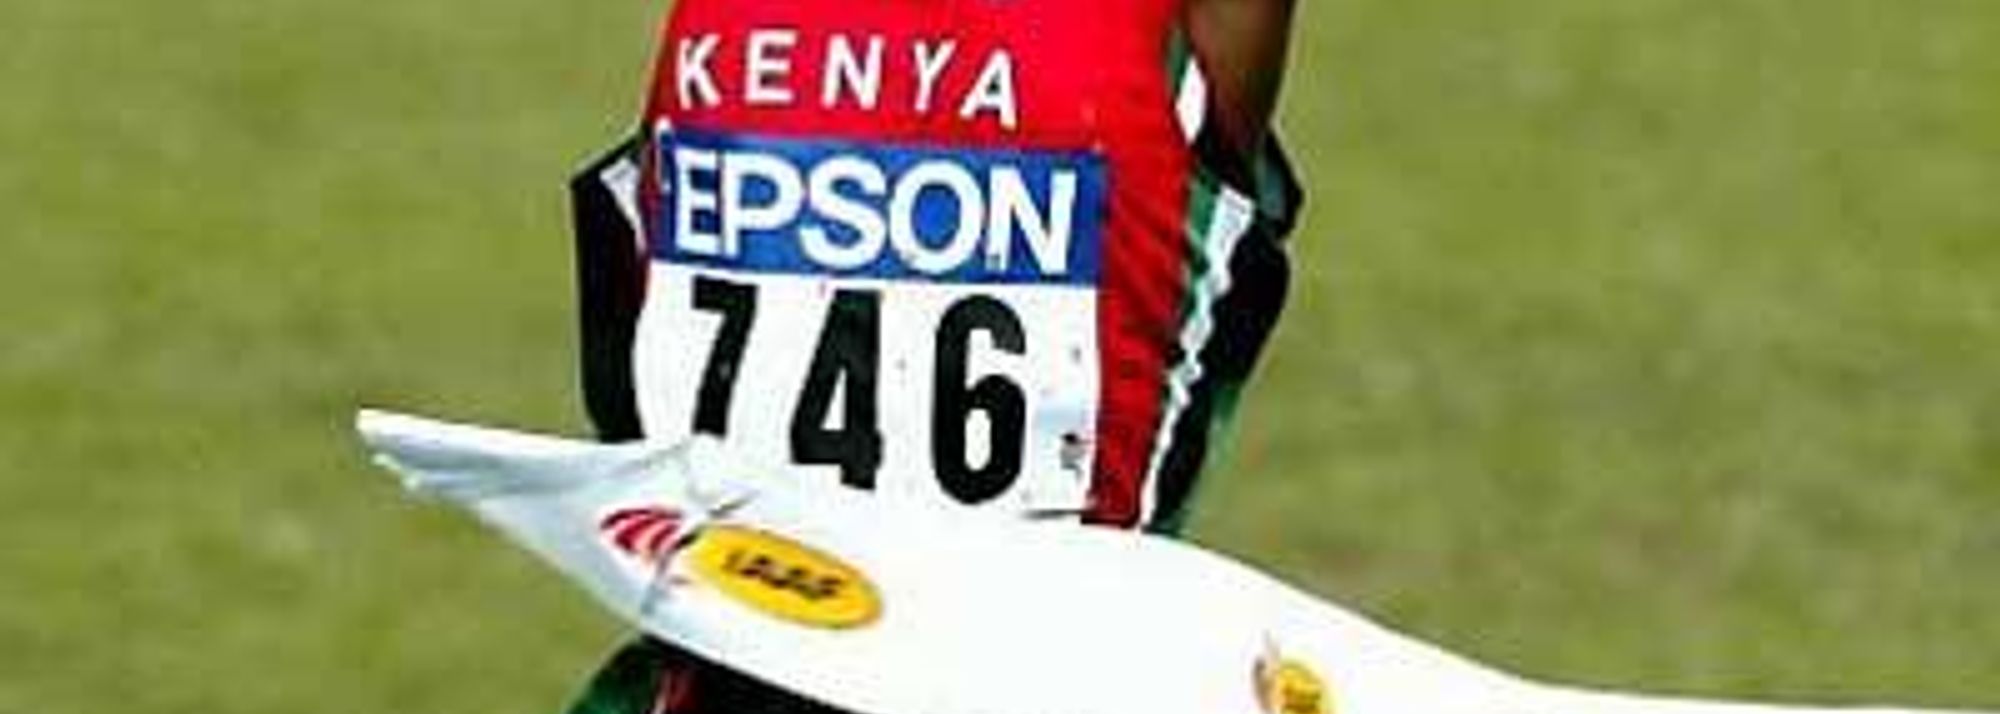 Edith Masai, by winning her third IAAF World Cross Country short course title 11 days short of her 37th birthday, prompted the question: what might she have achieved in her international running career had she started in earnest earlier than it did, just five years ago?